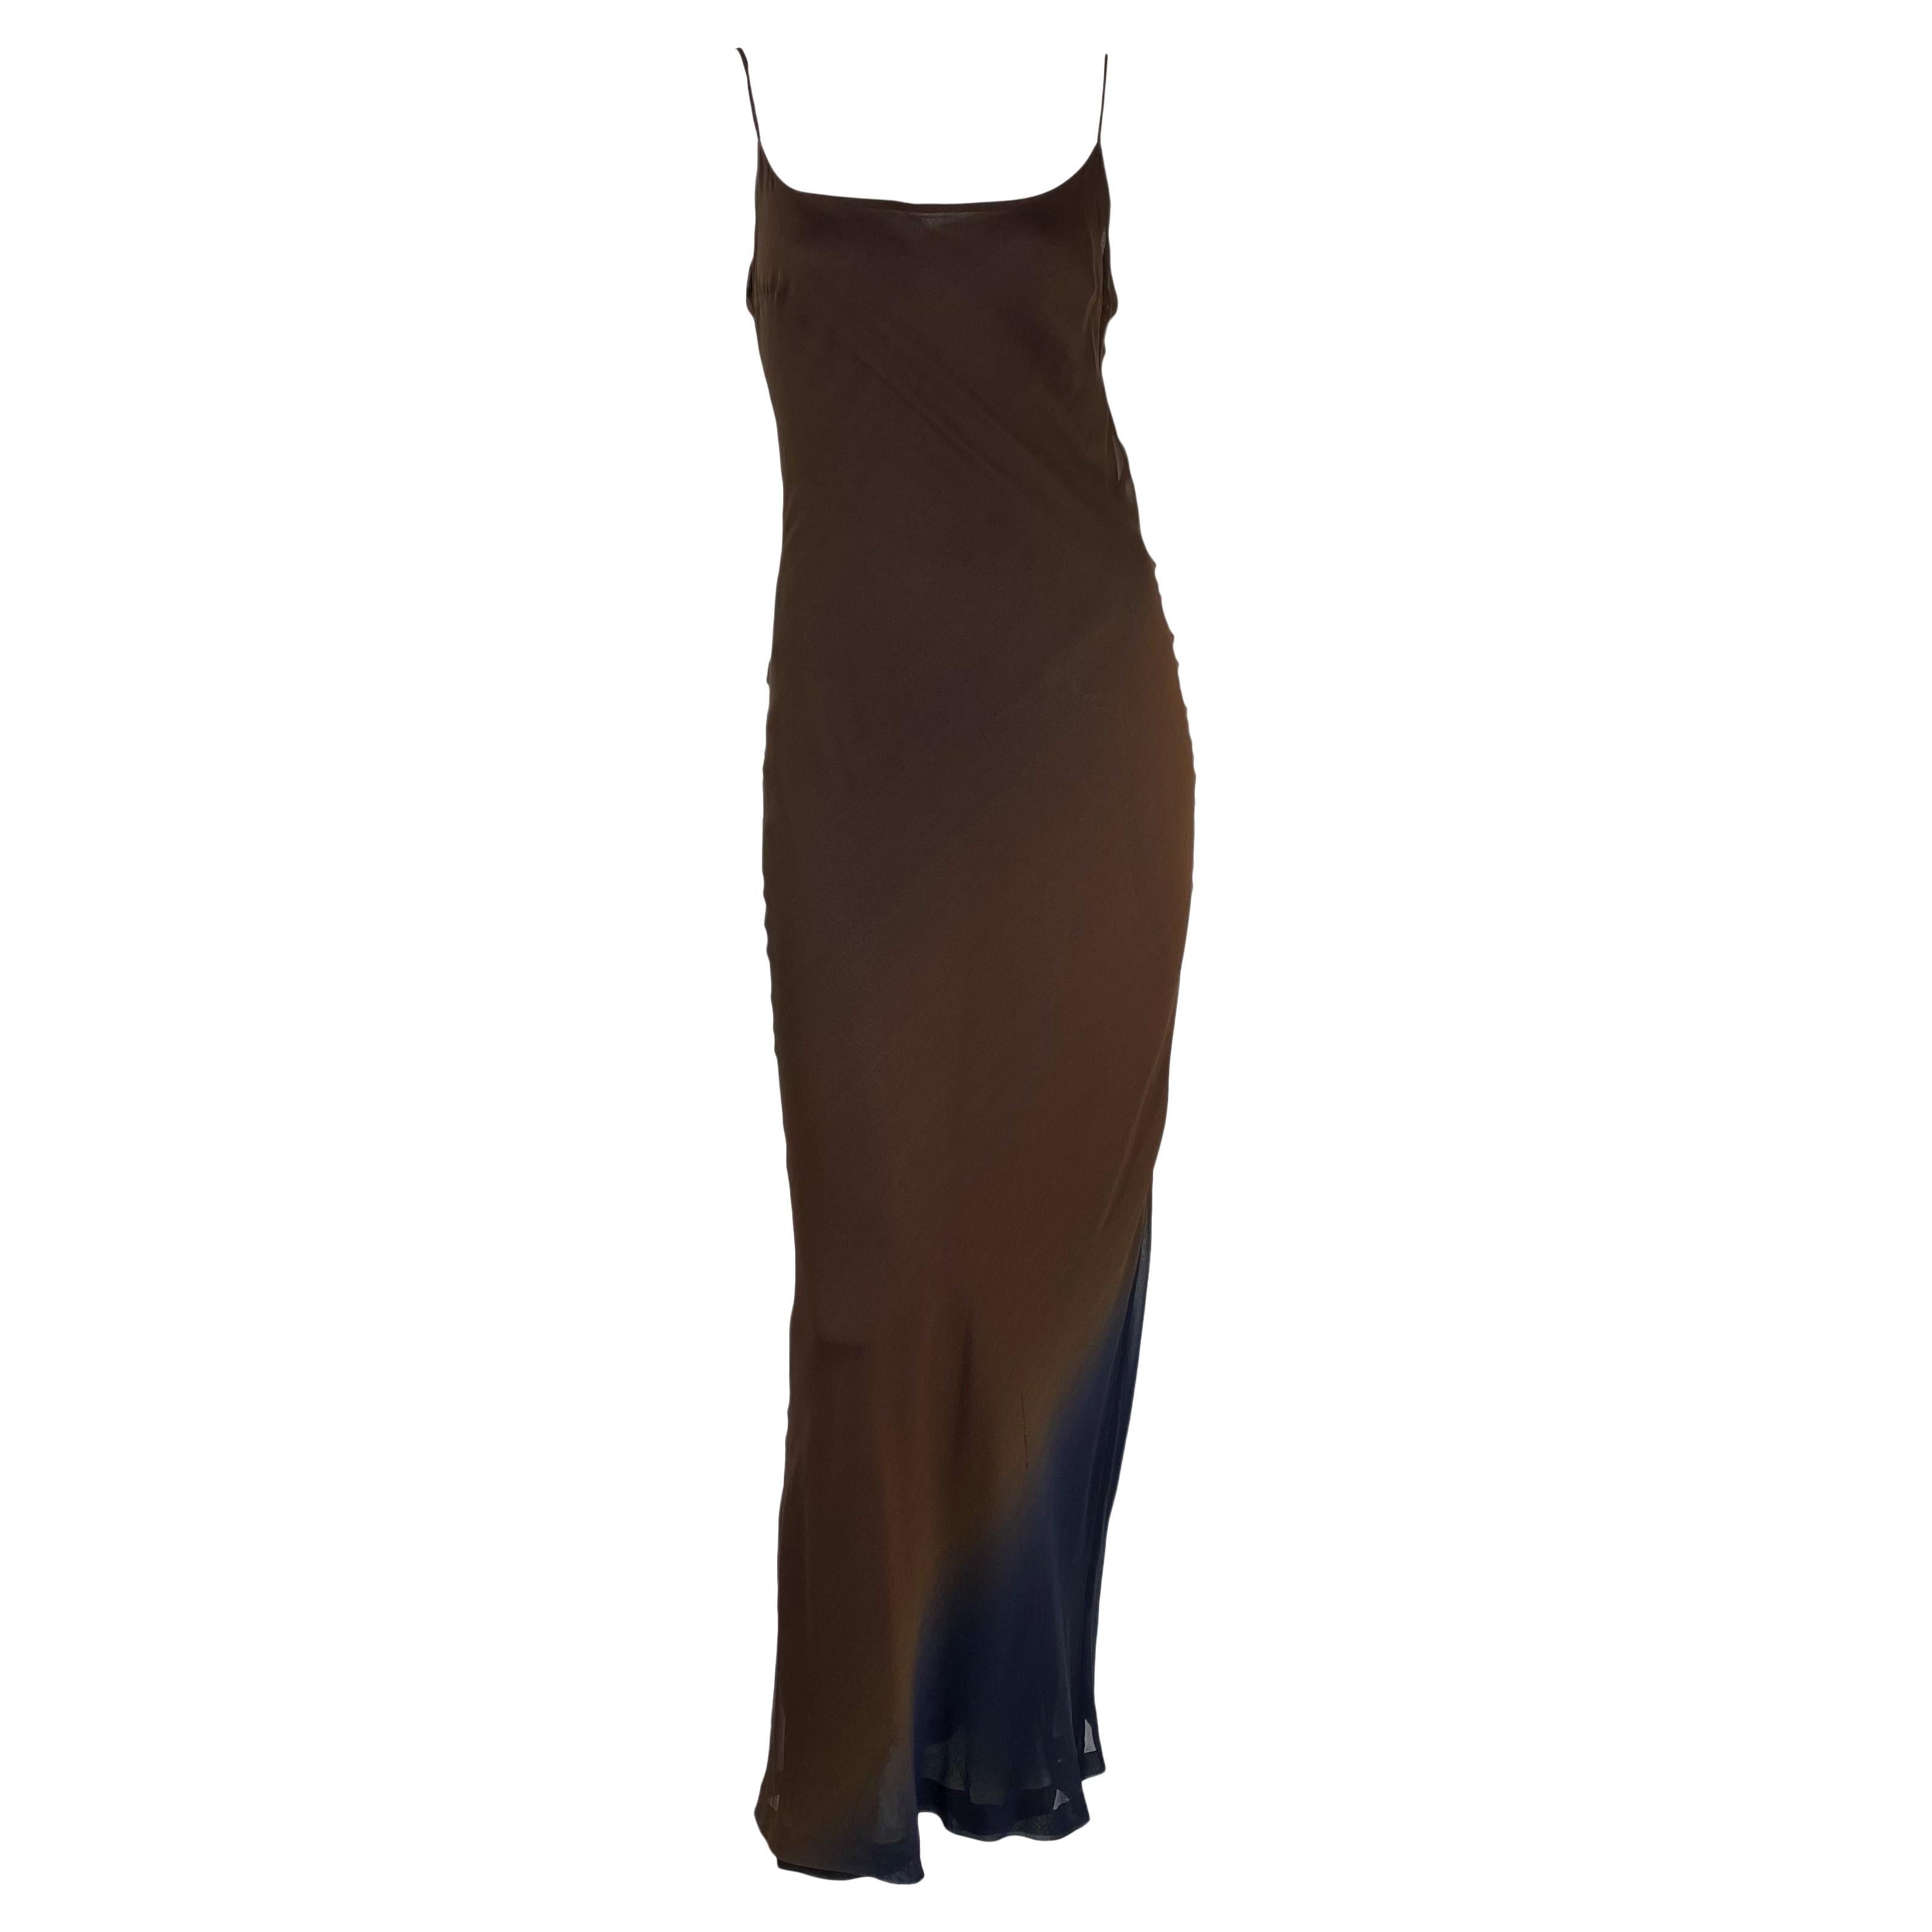 S/S 1997 Gucci by Tom Ford Brown Blue Sheer Silk Slip Gown Column Dress For Sale